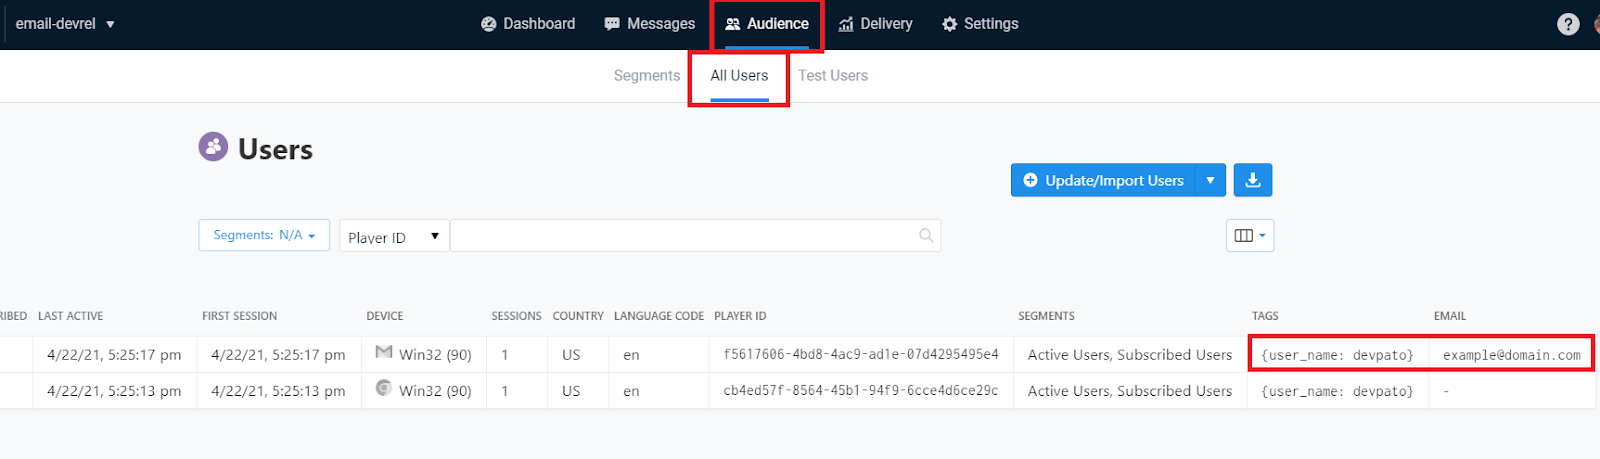 How to Use OneSignal + SendGrid to Send Automated Email Campaigns From Your Web Application